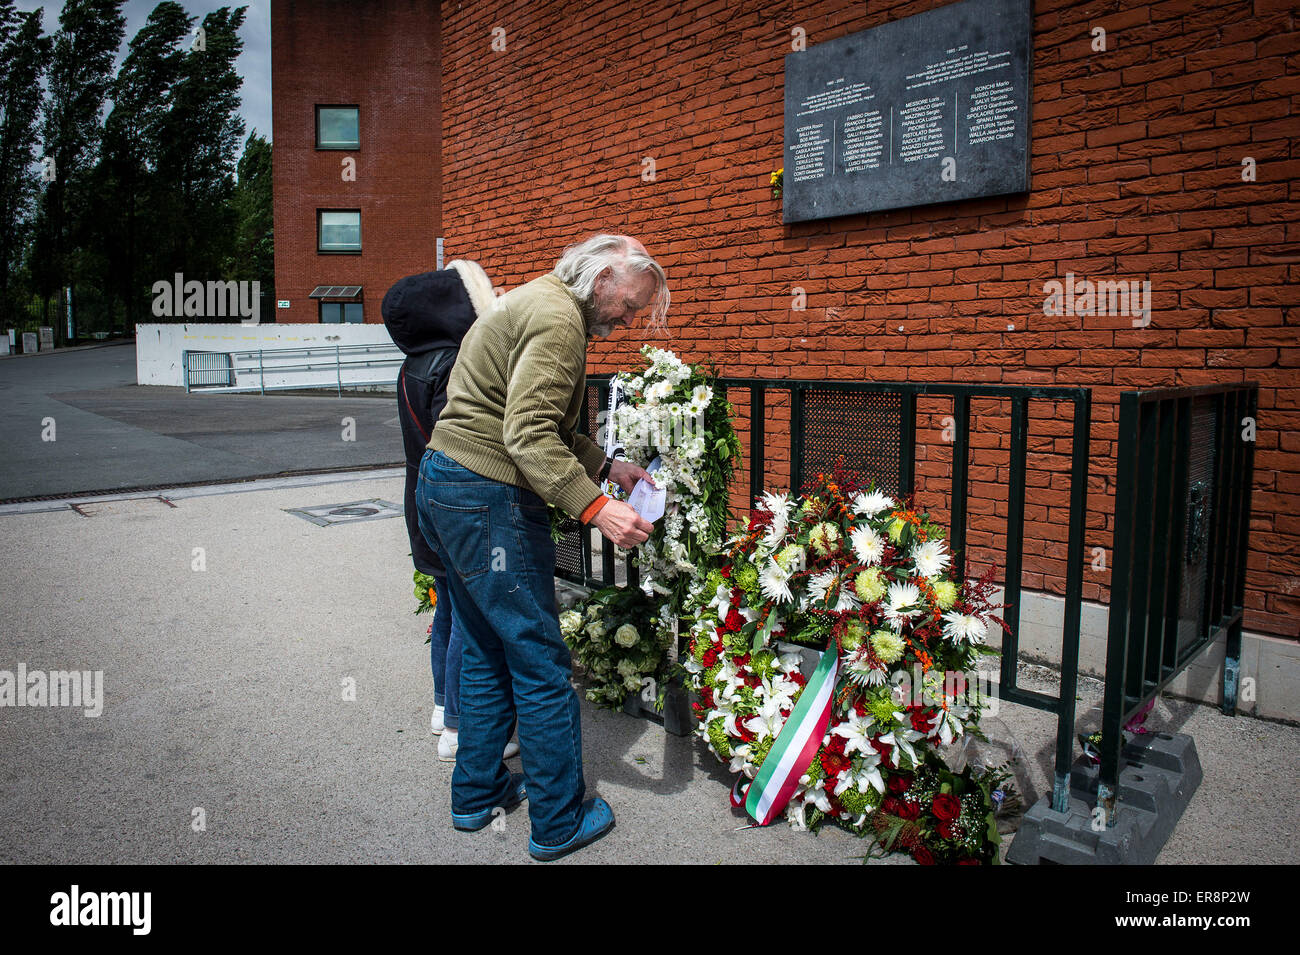 Brussels, Bxl, Belgium. 29th May, 2015. Visitors pay the tribute at the day of the 30th anniversary of the tragedy at the Heysel stadium, renamed King Baudouin Stadium in Brussels, Belgium on 29.05.2015 The Heysel disaster occurred before the start of the 1985 European Cup final Liverpool - Juventus when a wall collapsed under the pressure of escaping fans as result of riots before the start. 39 people died and 600 were injured. by Wiktor Dabkowski Credit:  Wiktor Dabkowski/ZUMA Wire/Alamy Live News Stock Photo